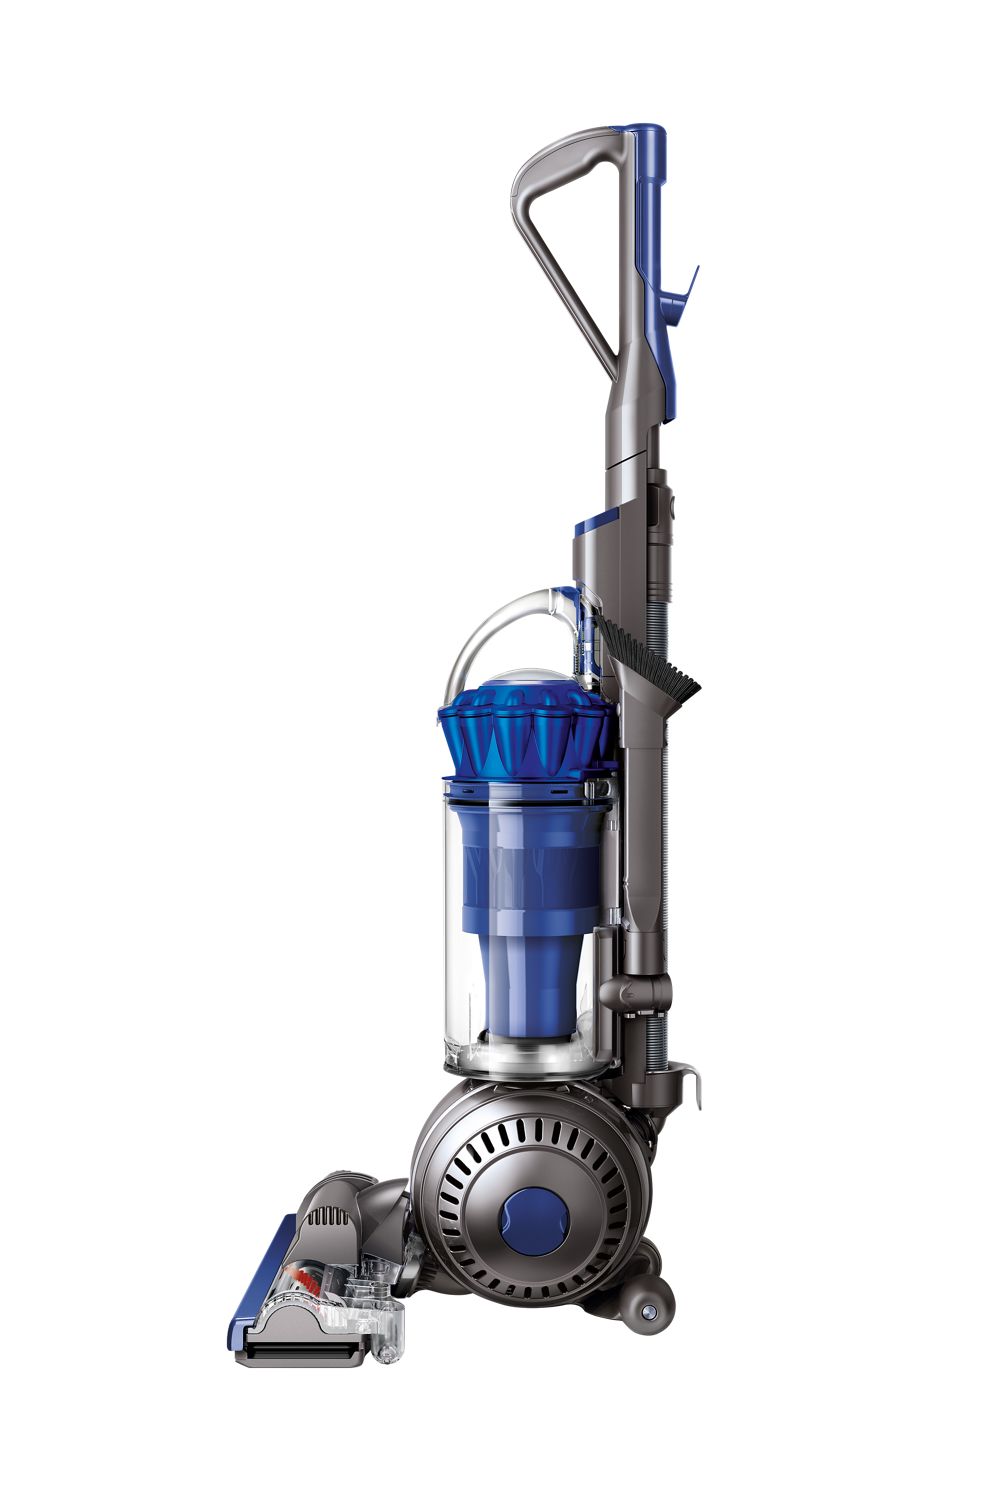 Dyson UP32 Ball Animal Upright Vacuum Cleaner New 2023